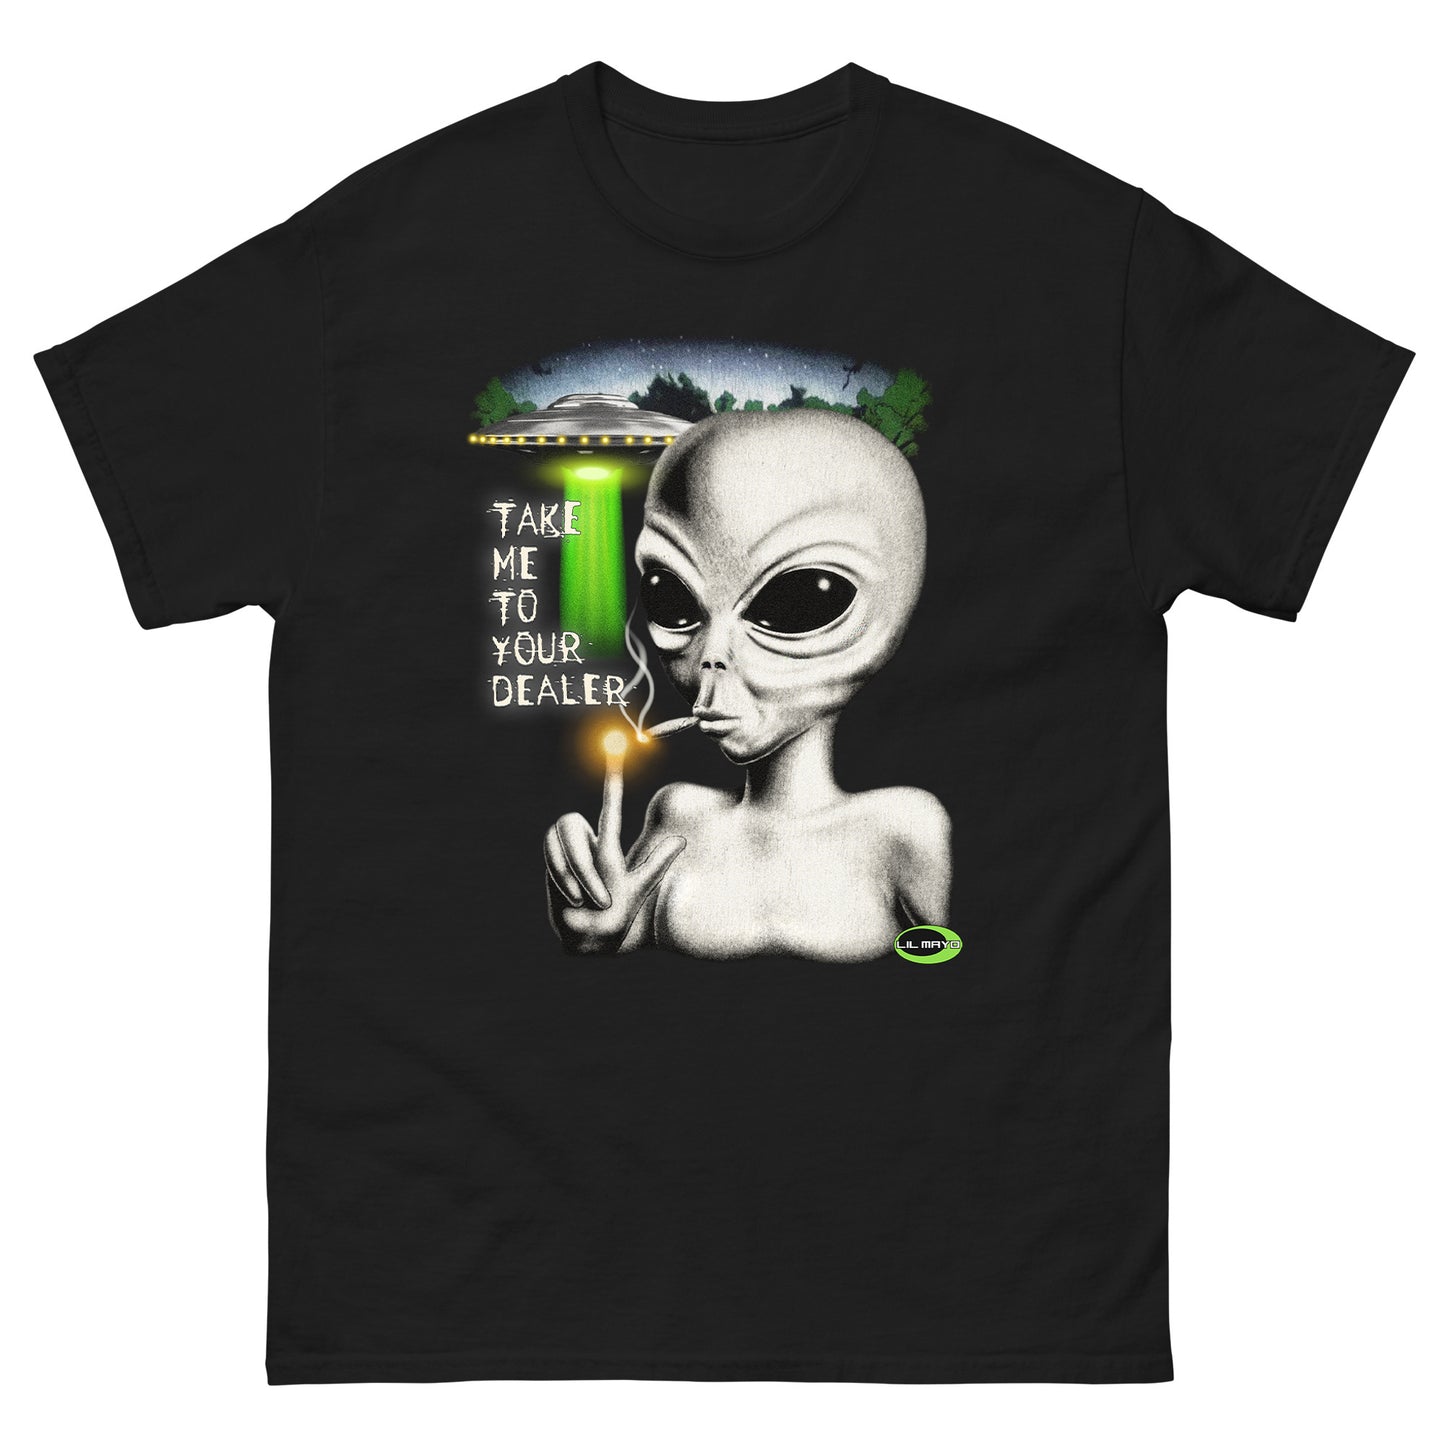 LIL MAYO ALIEN TAKE ME TO YOUR DEALER TEE SHIRT